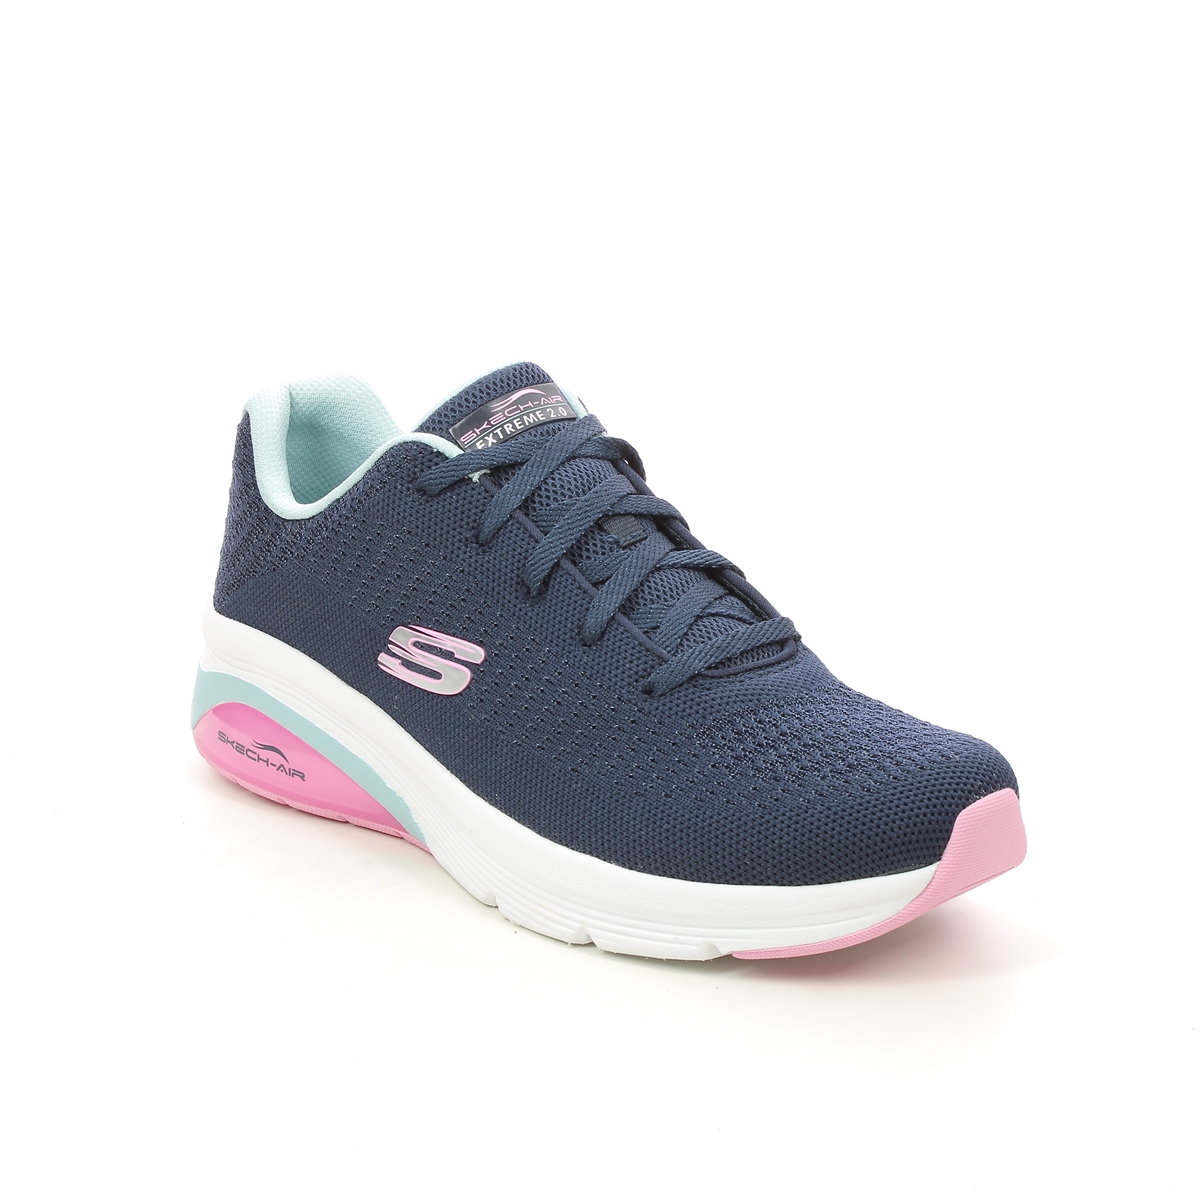 Skechers Skech Air Extreme NVLB Navy Light Blue Womens trainers 149645 in a Plain Textile in Size 6